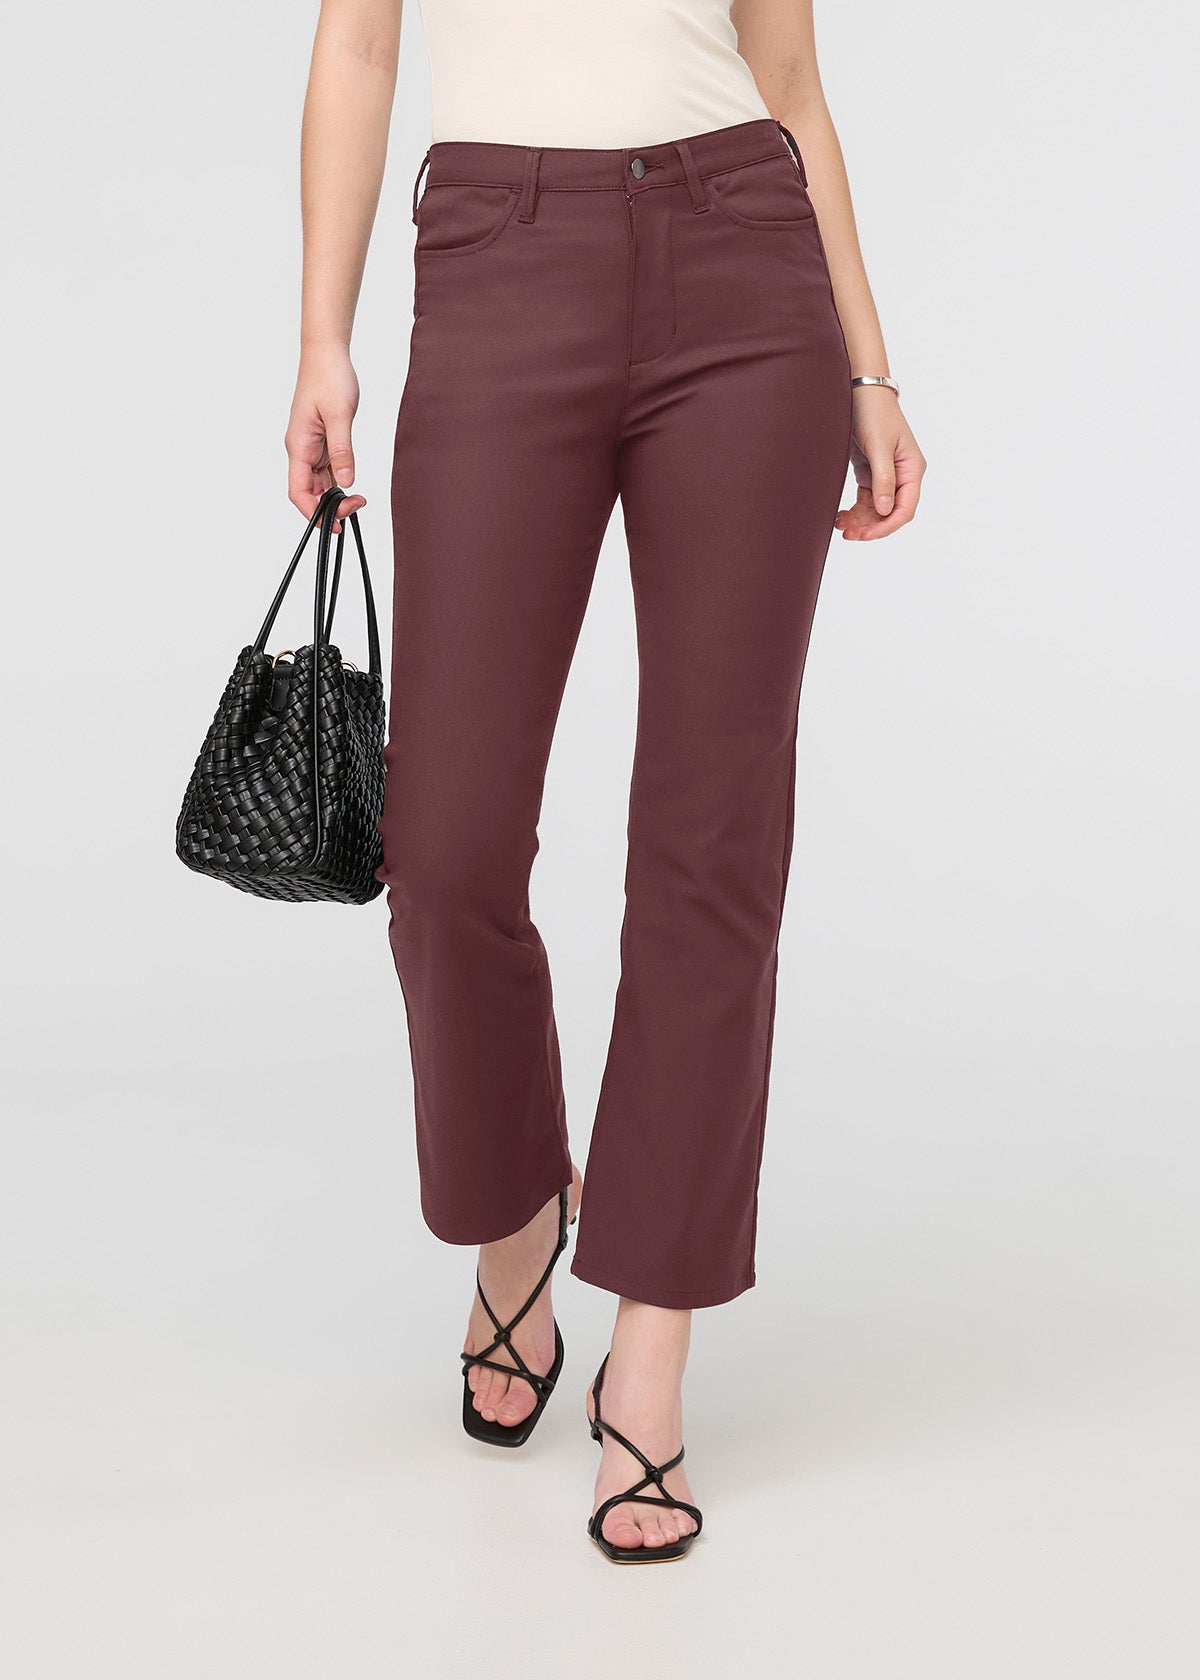 Buy She Stretch Pants Women's Skinny Ankle Trousers (L, MEHROON) at